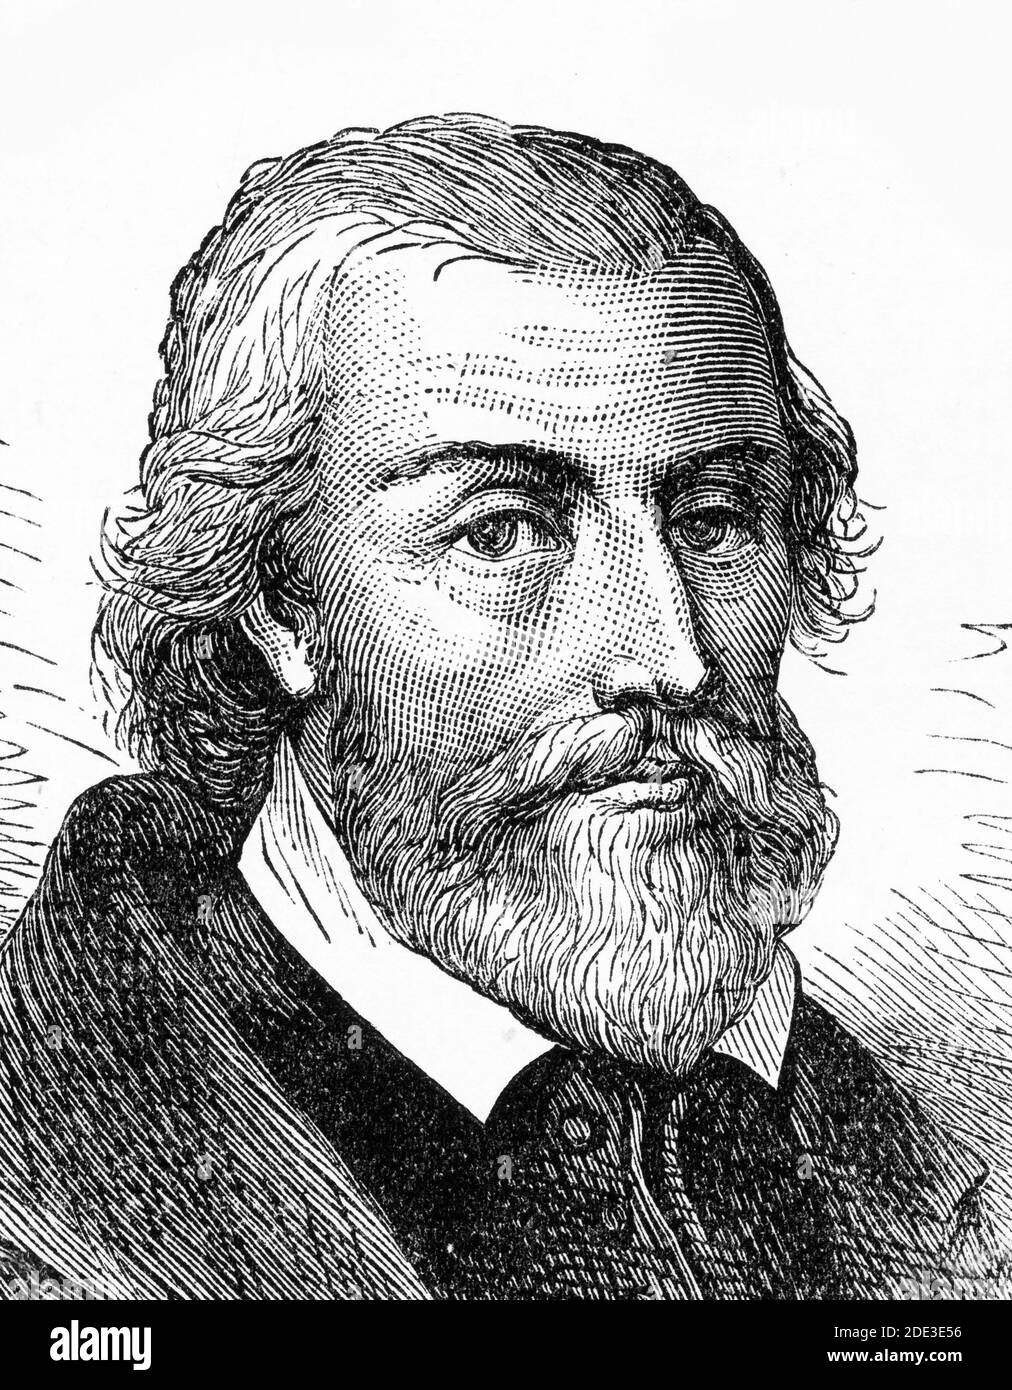 Engraving of John Rogers.  Illustration from 'The history of Protestantism' by James Aitken Wylie (1808-1890), pub. 1878 Stock Photo